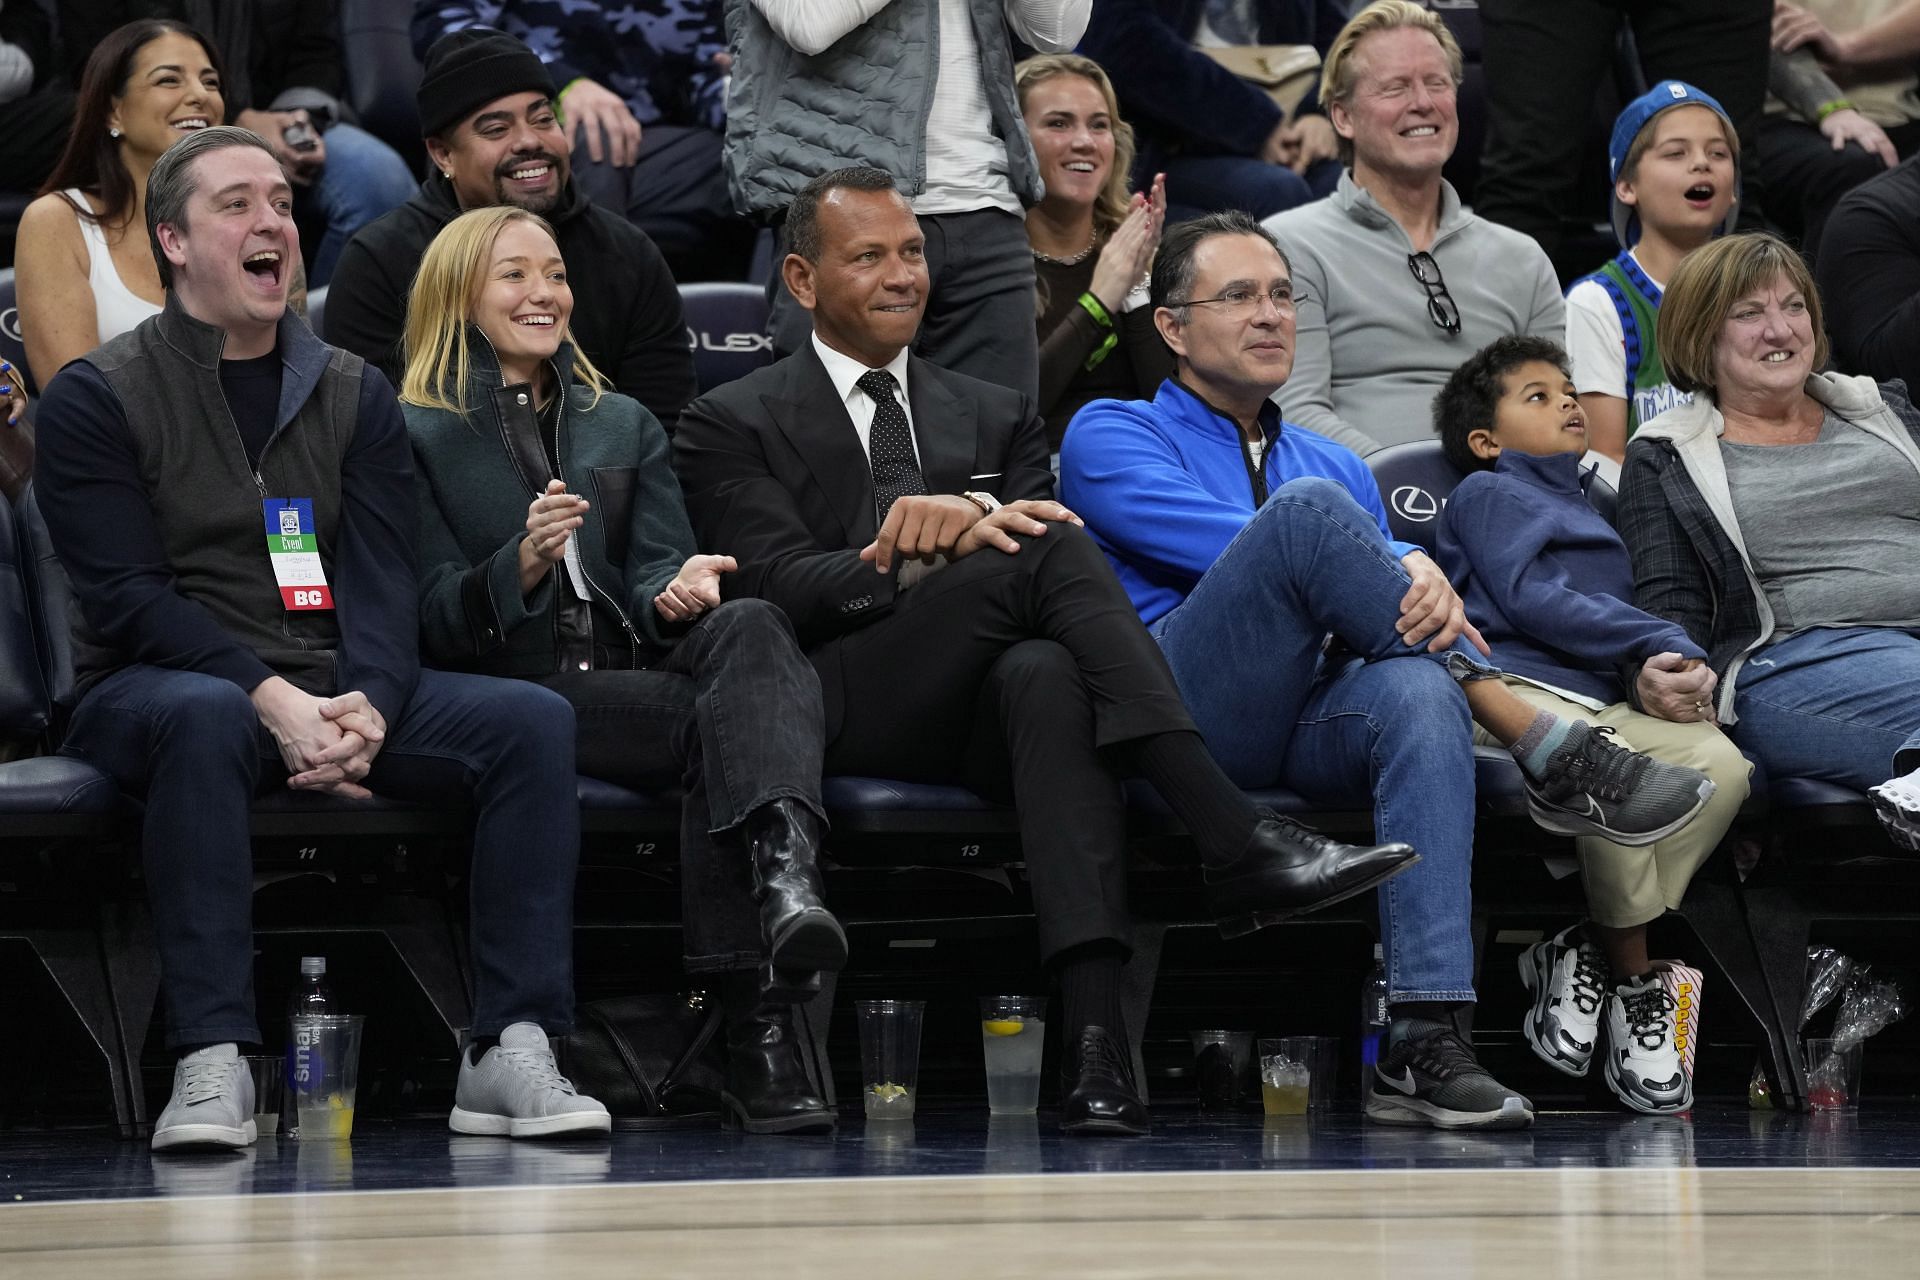 Alex Rodriguez sideline watching a Timberwolves game